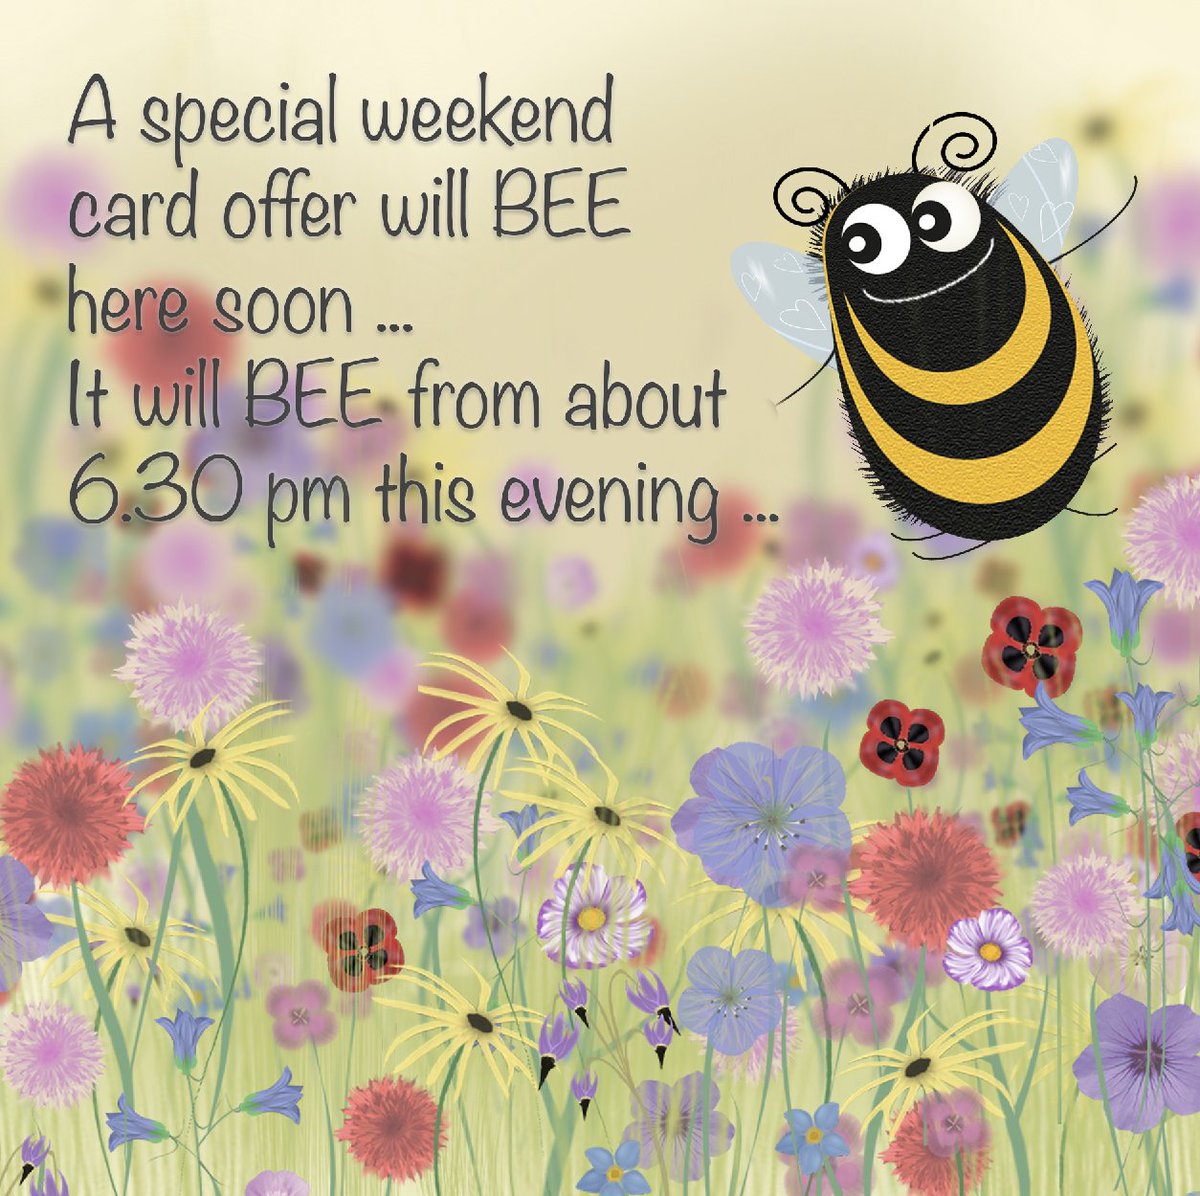 Just to let you know ... to BEE ready ... we have a little weekend card offer buzzing in and it will be landing early this evening ... 🐝🌼🌸🌞 :)